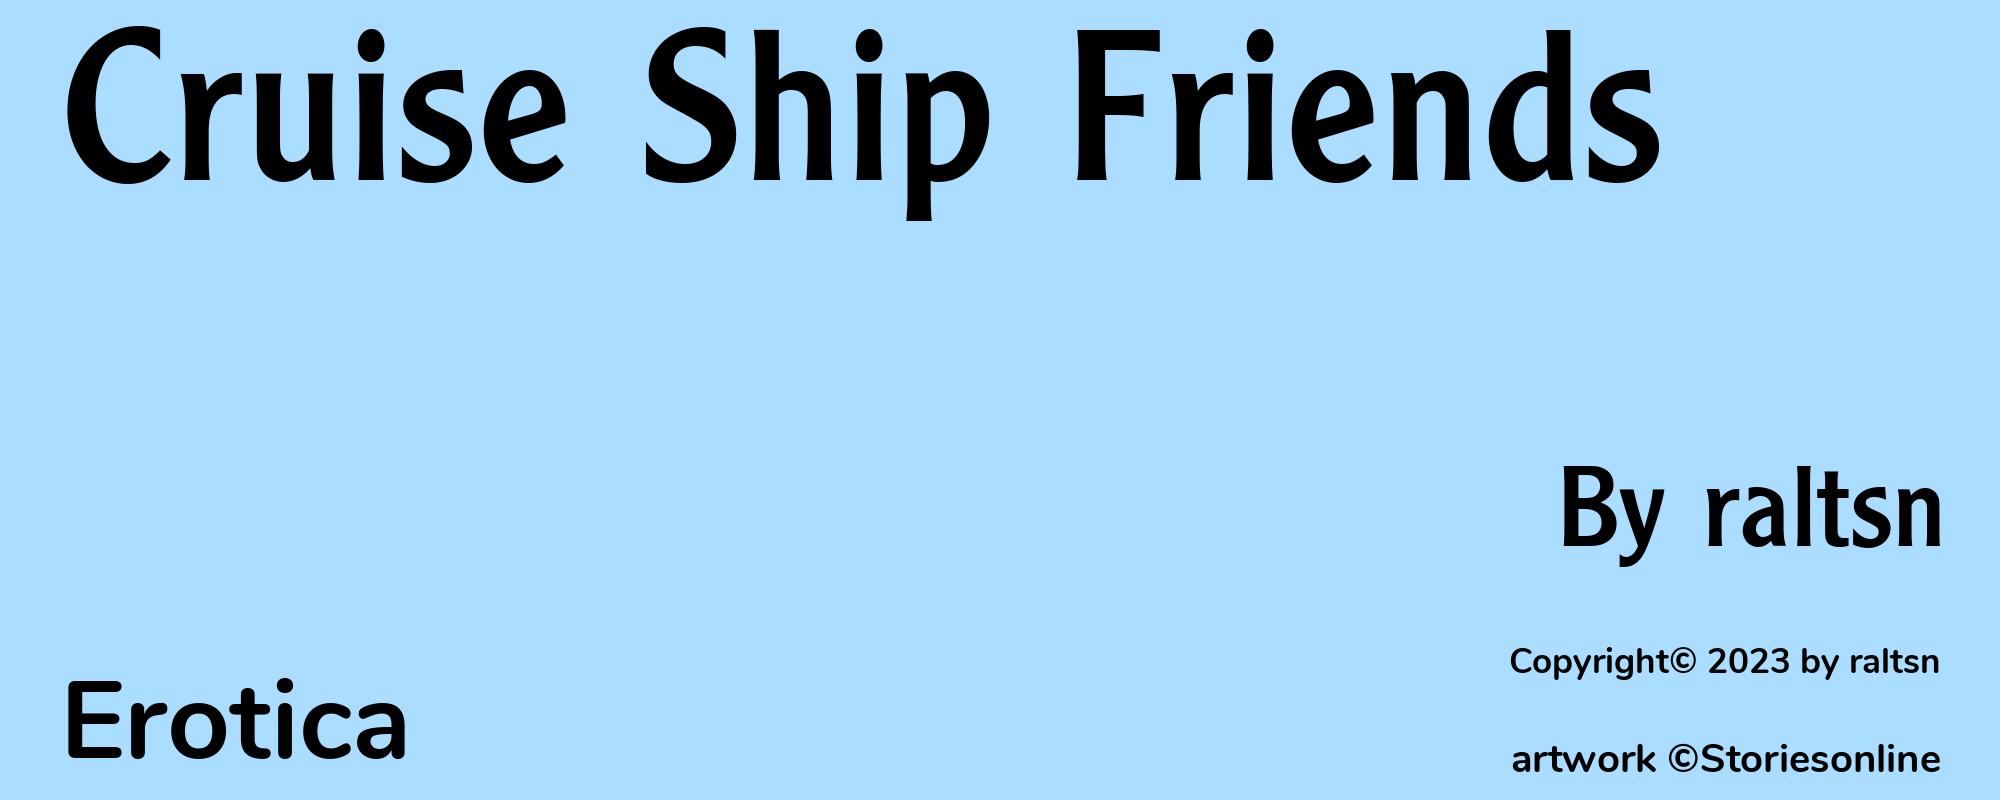 Cruise Ship Friends - Cover